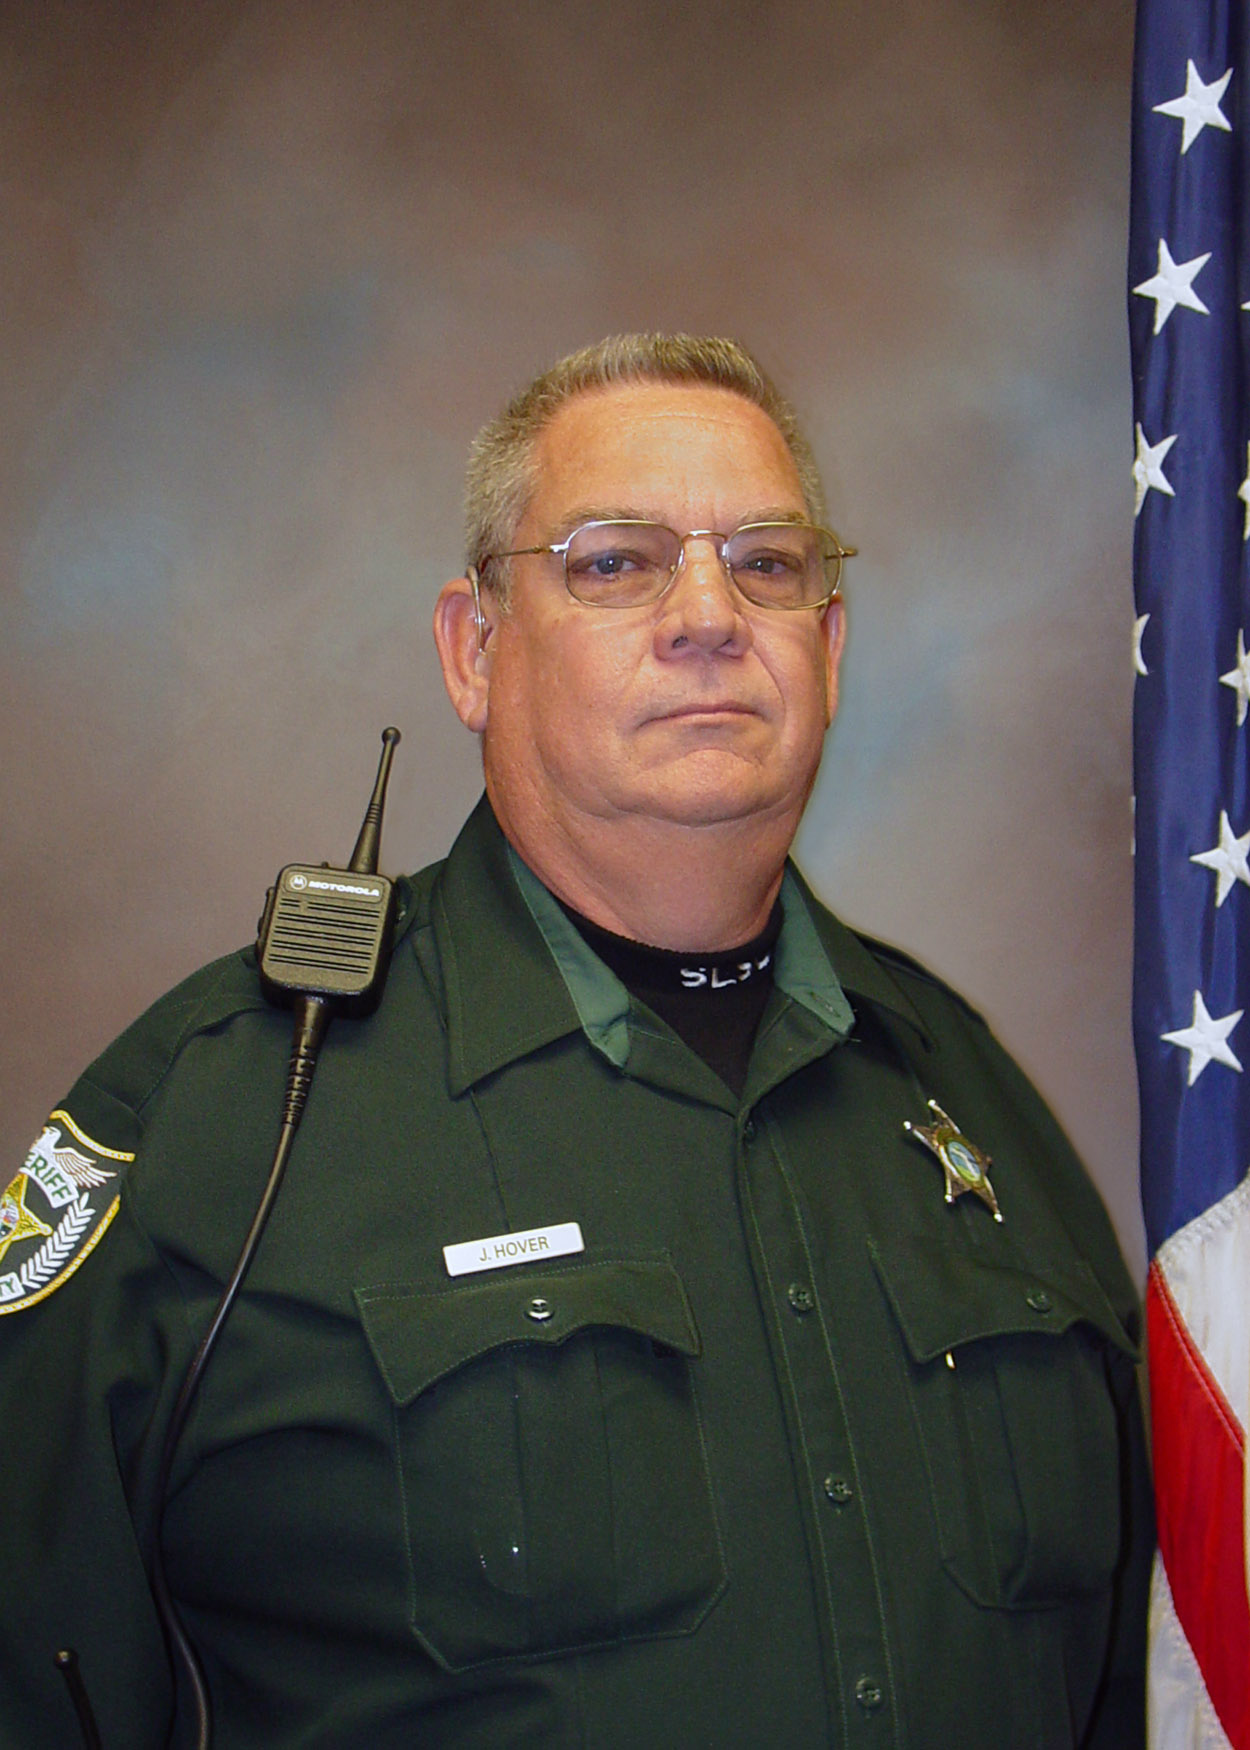 Master Deputy Joseph S. Hover | St. Lucie County Sheriff's Office, Florida